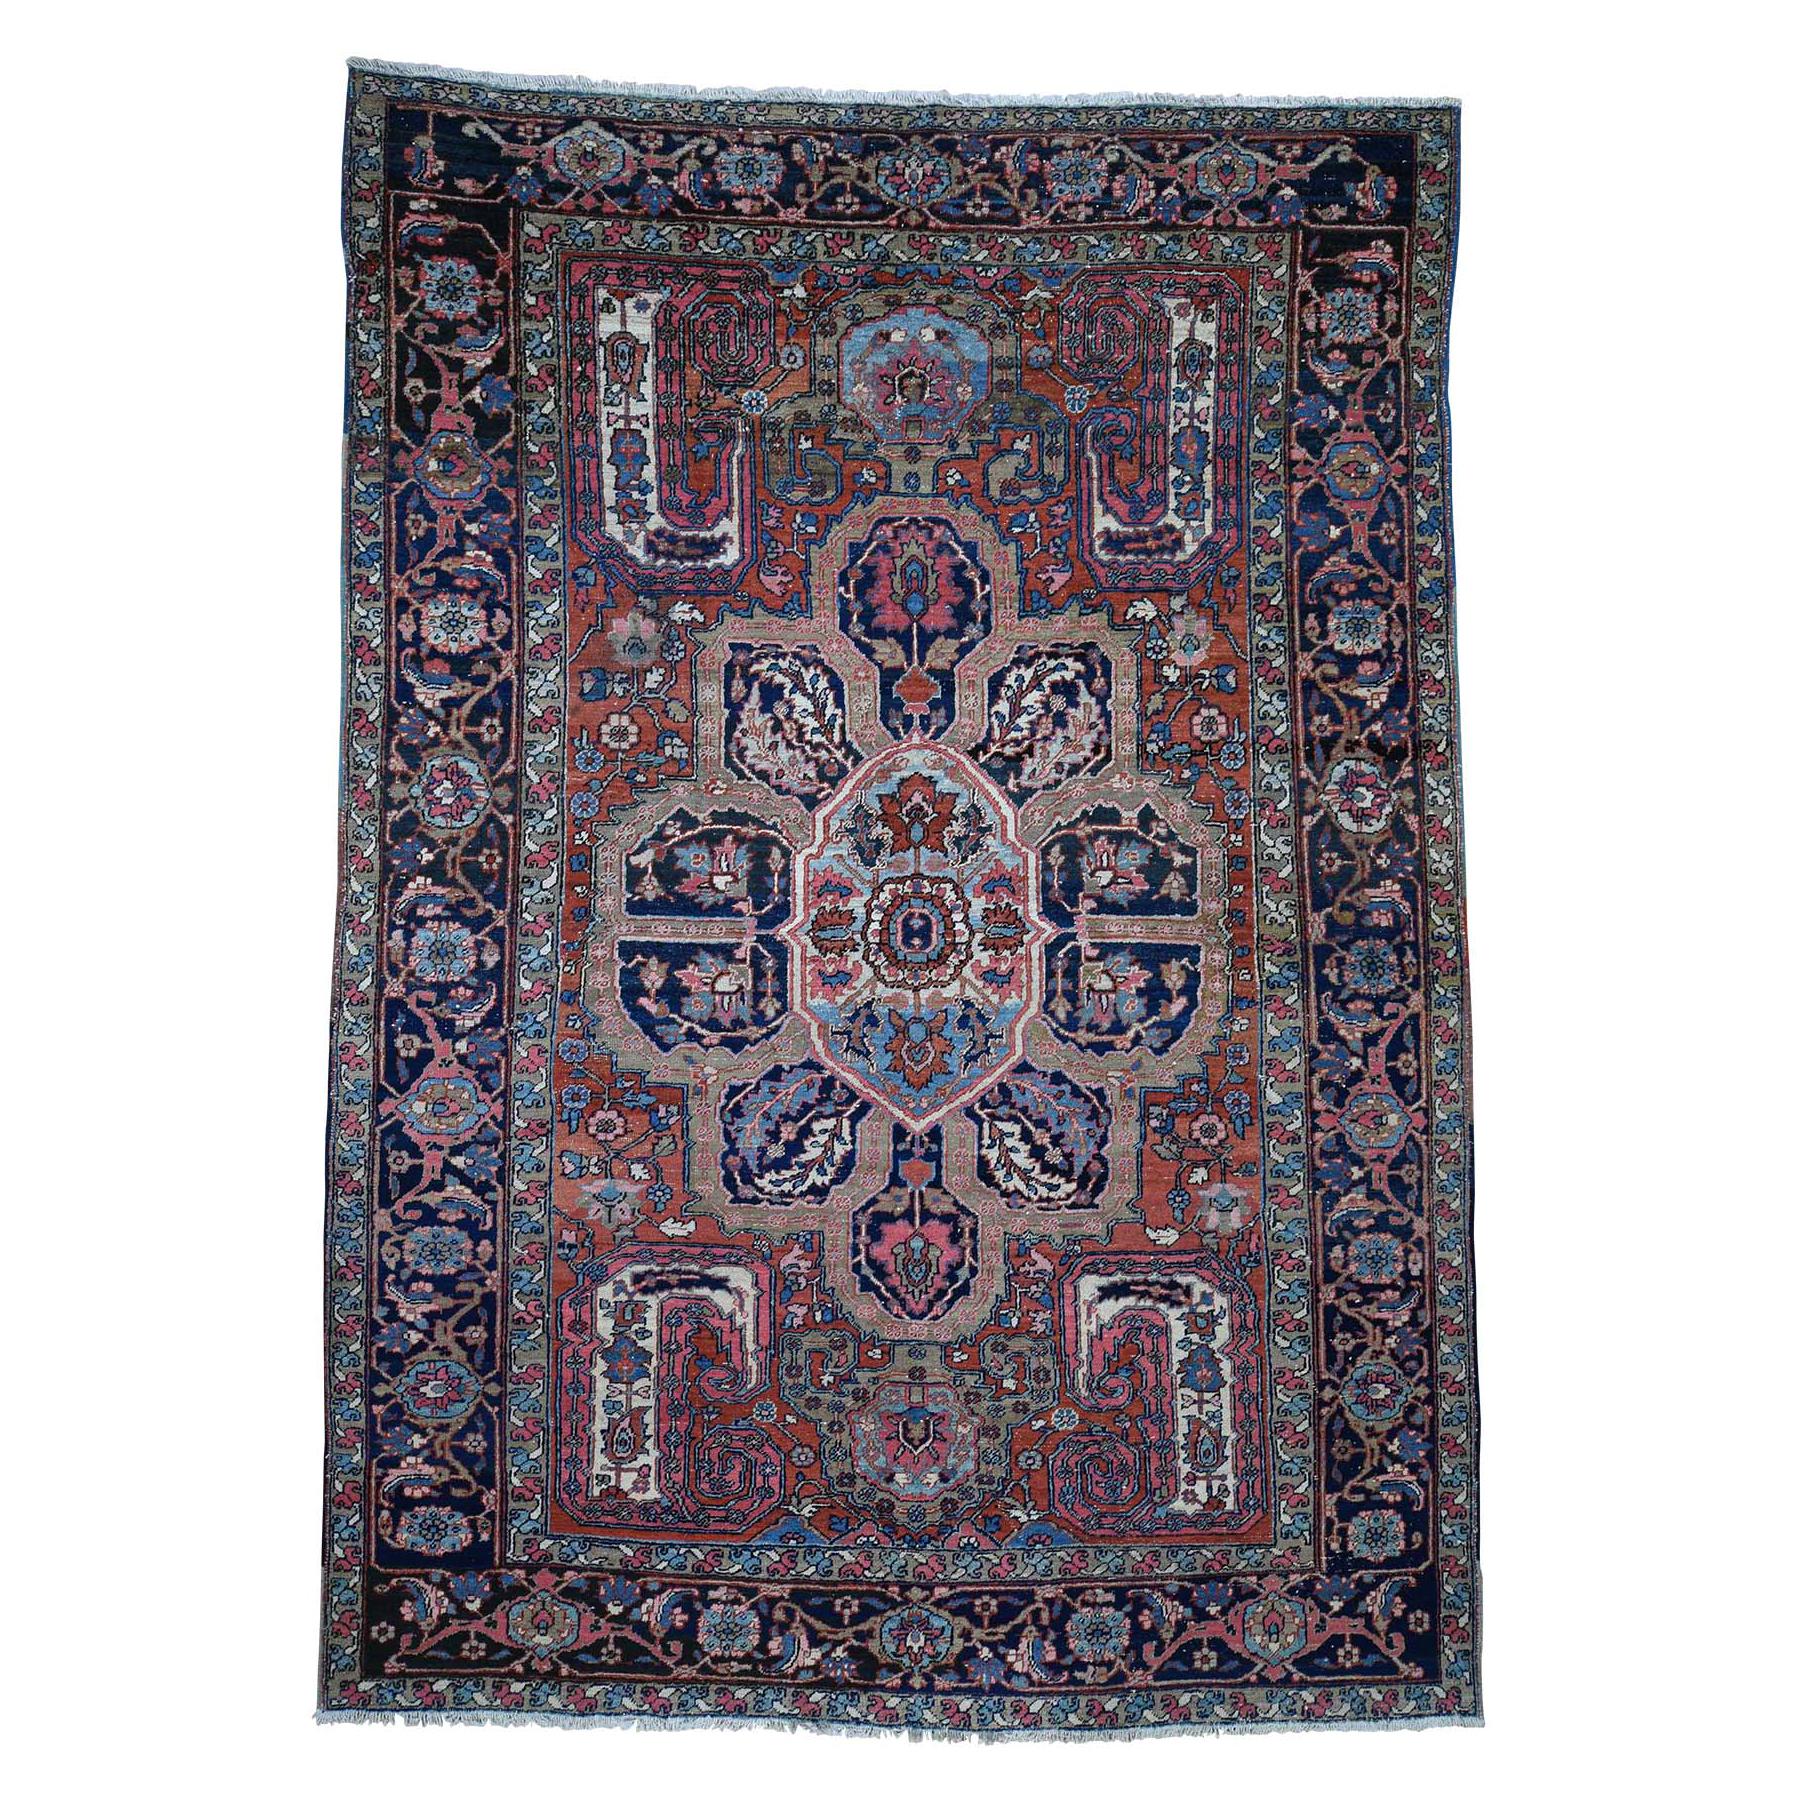 Antique Persian Heriz Good Condition Flower Design Hand-Knotted Oriental Rug